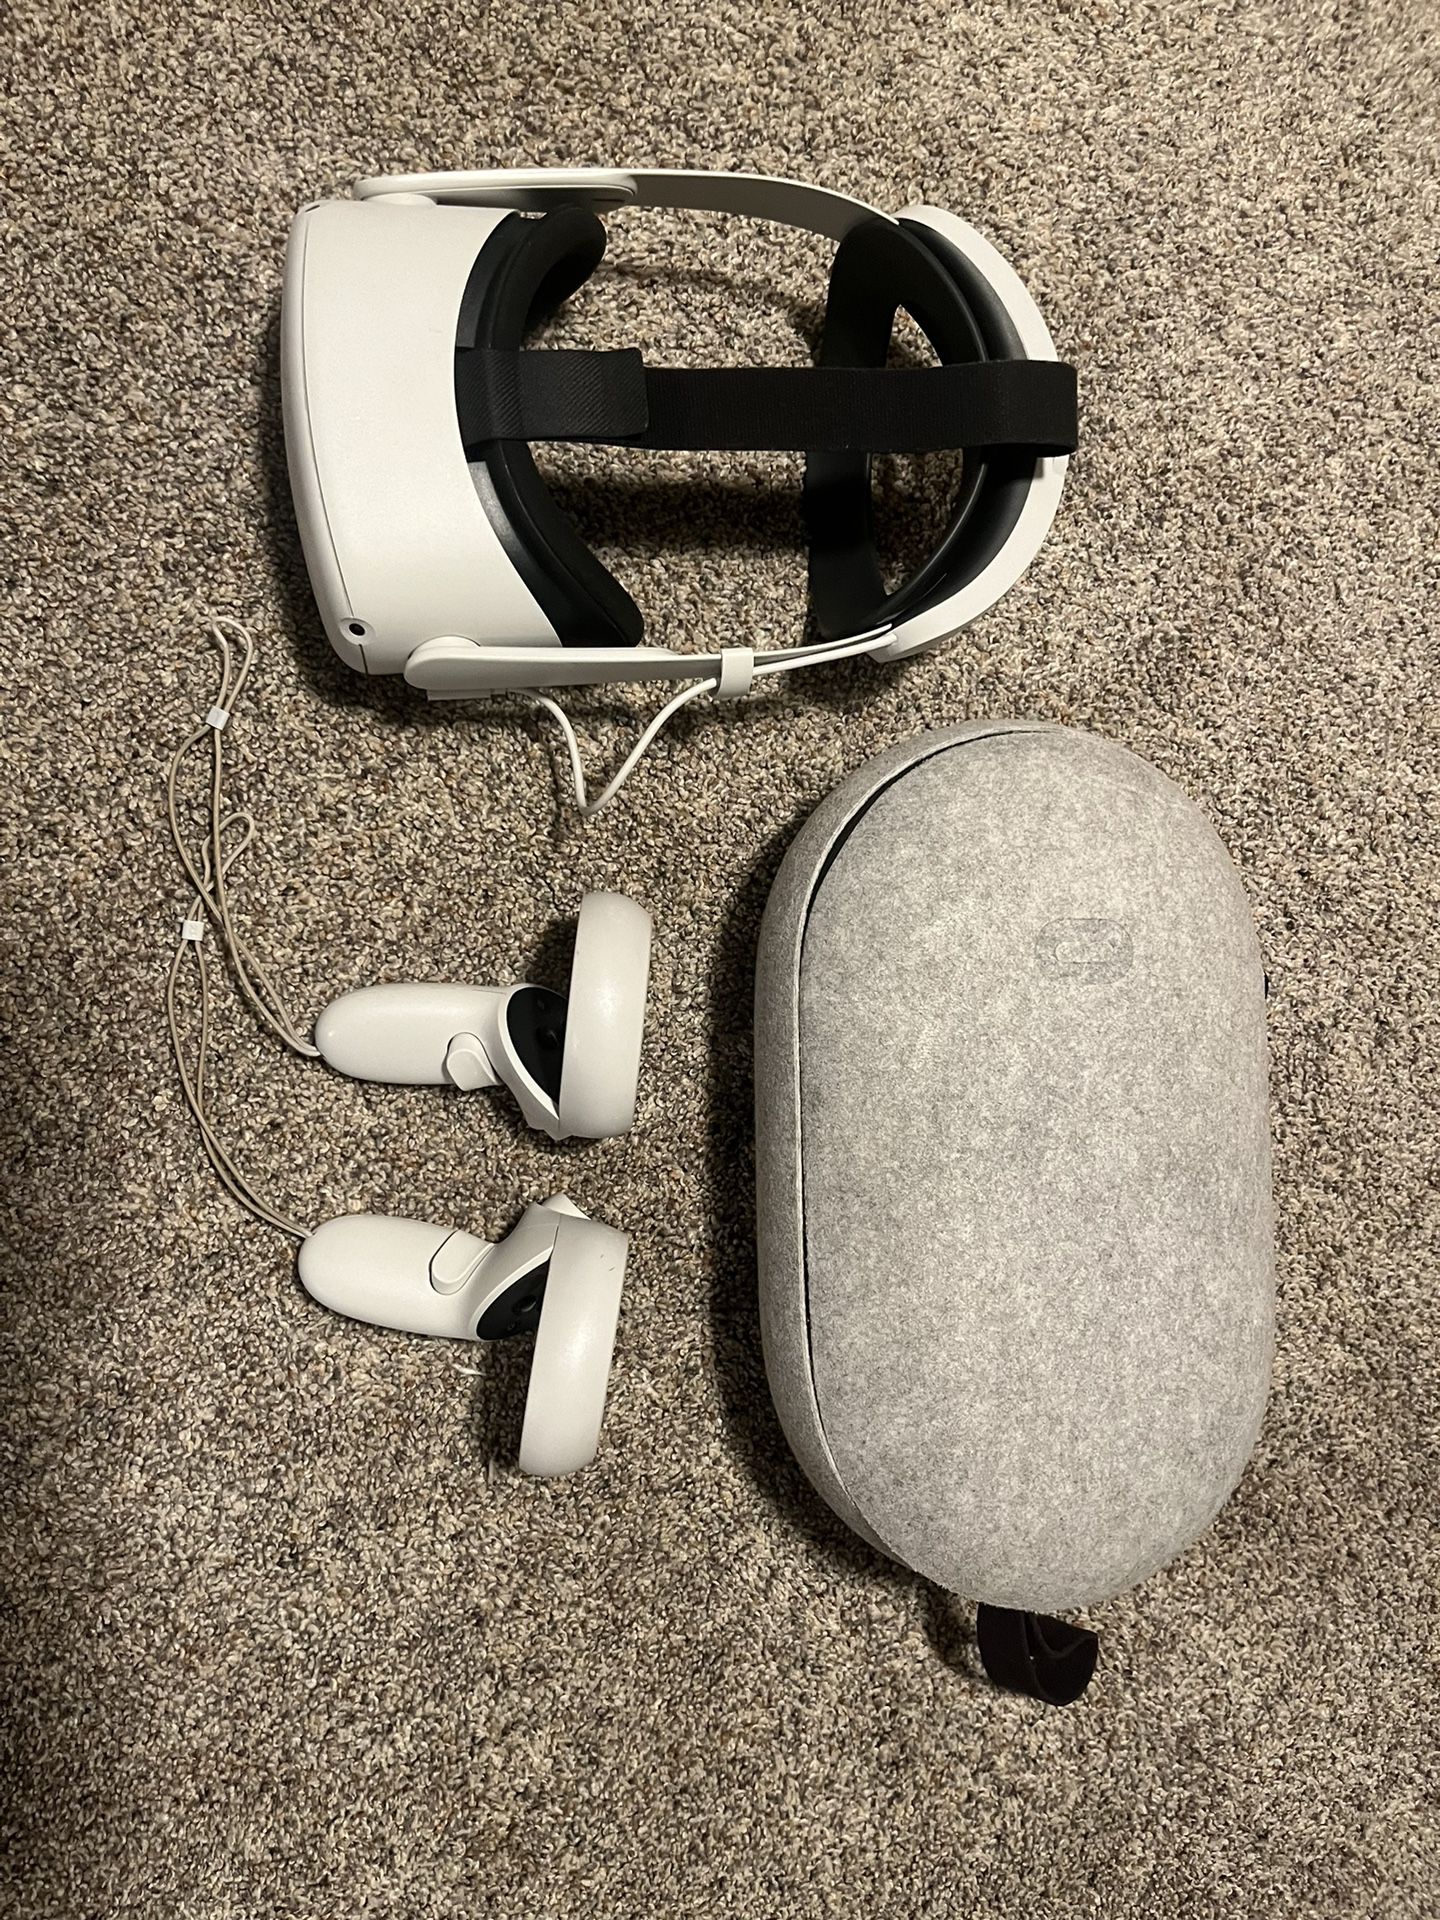 Oculus Quest 2 (64 Gigabytes) Extended Battery, Elite Strap, and Carrying Case 